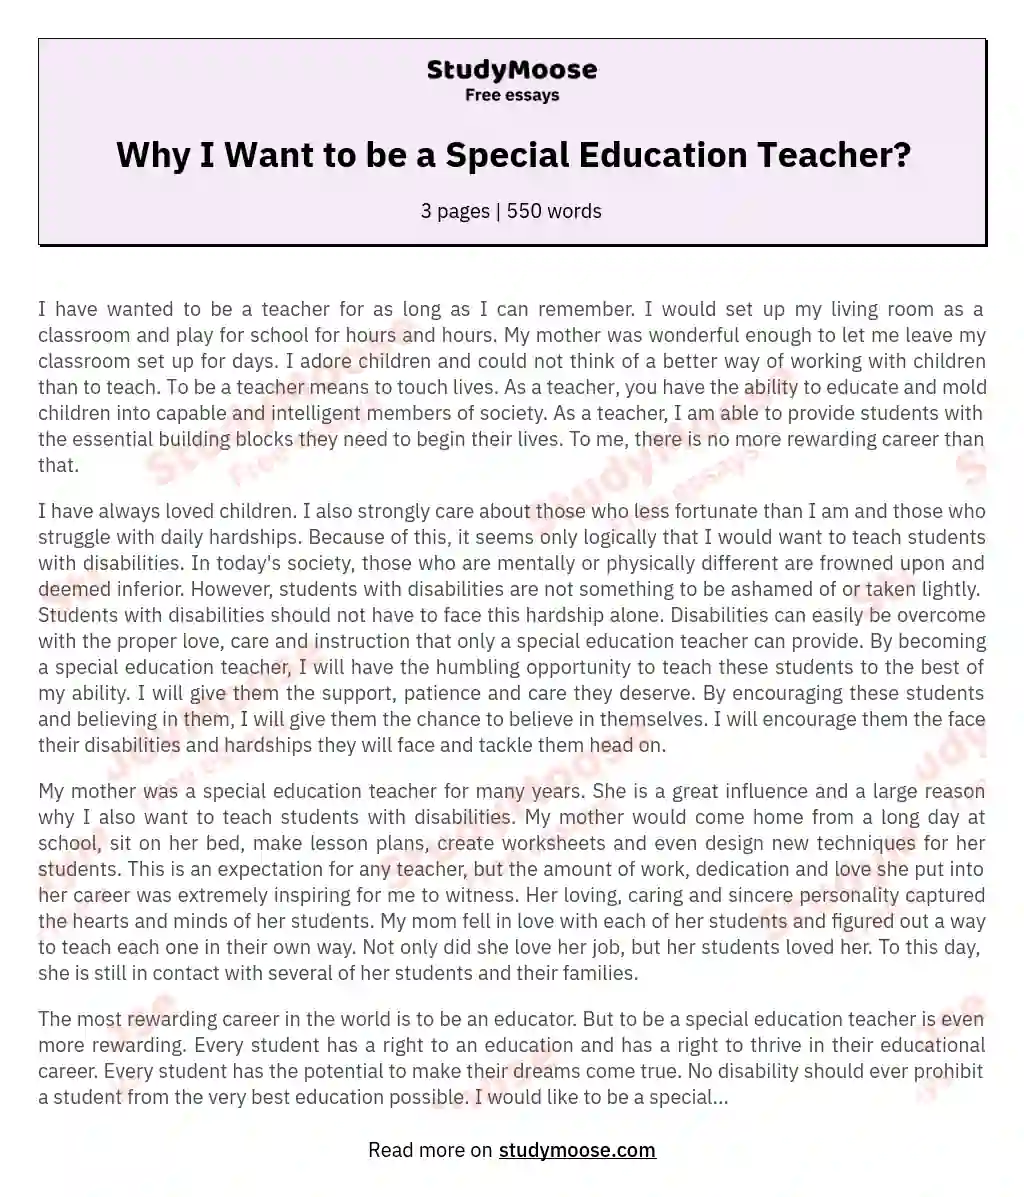 Why I Want to be a Special Education Teacher? essay